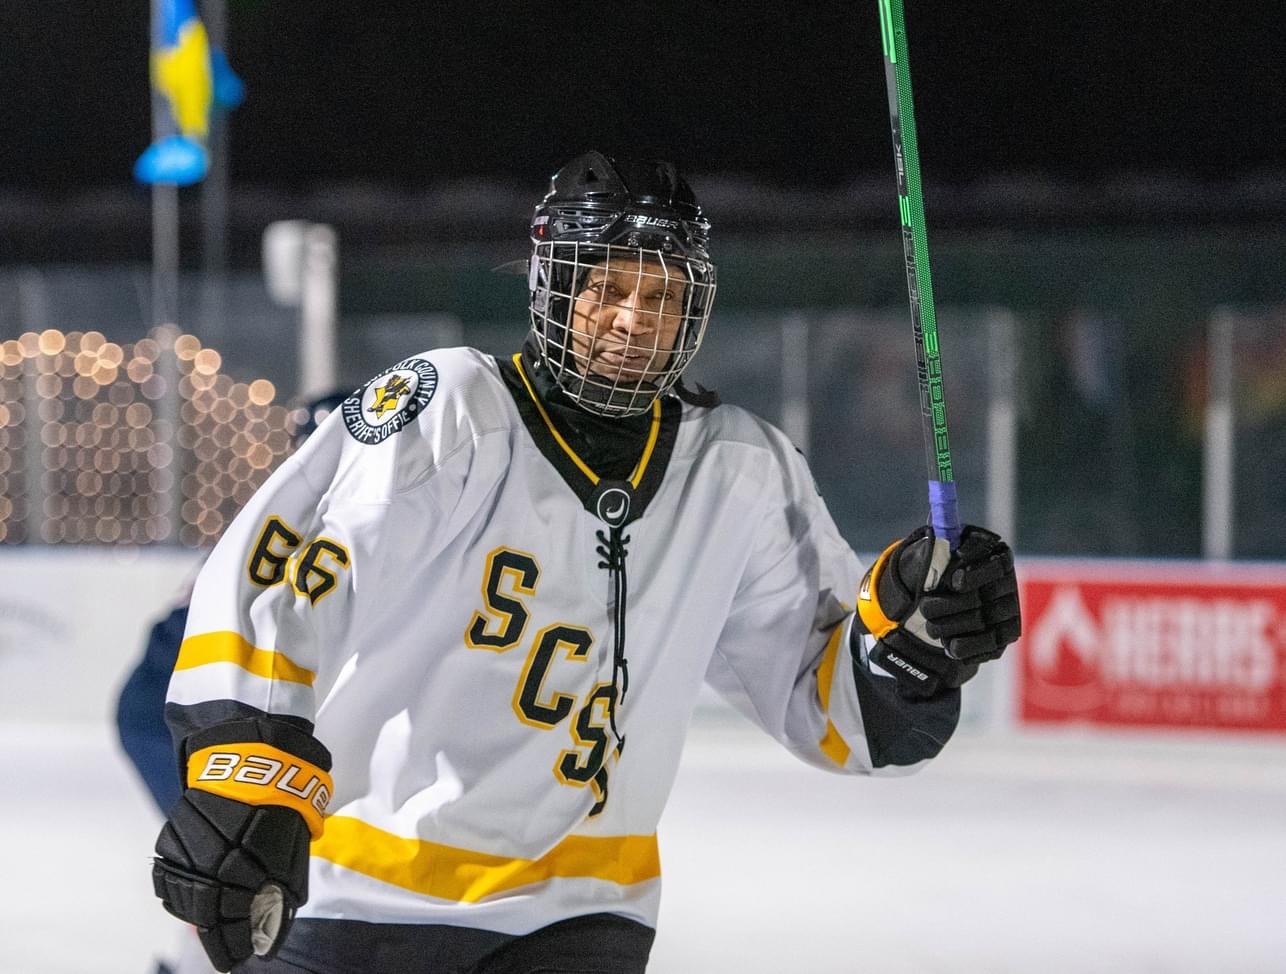 Suffolk County Sheriff Errol D. Toulon Jr. participated in Sunday night's game at Buckskill Winter Club in East Hampton between his outfit and the District 9 First Responders, made up of firefighters, police officers, EMTs and ocean rescue members from East Hampton, Sag Harbor and Southampton.  PHOTOS COURTESY SUSAN KETCHAM/SCSO HOCKEY